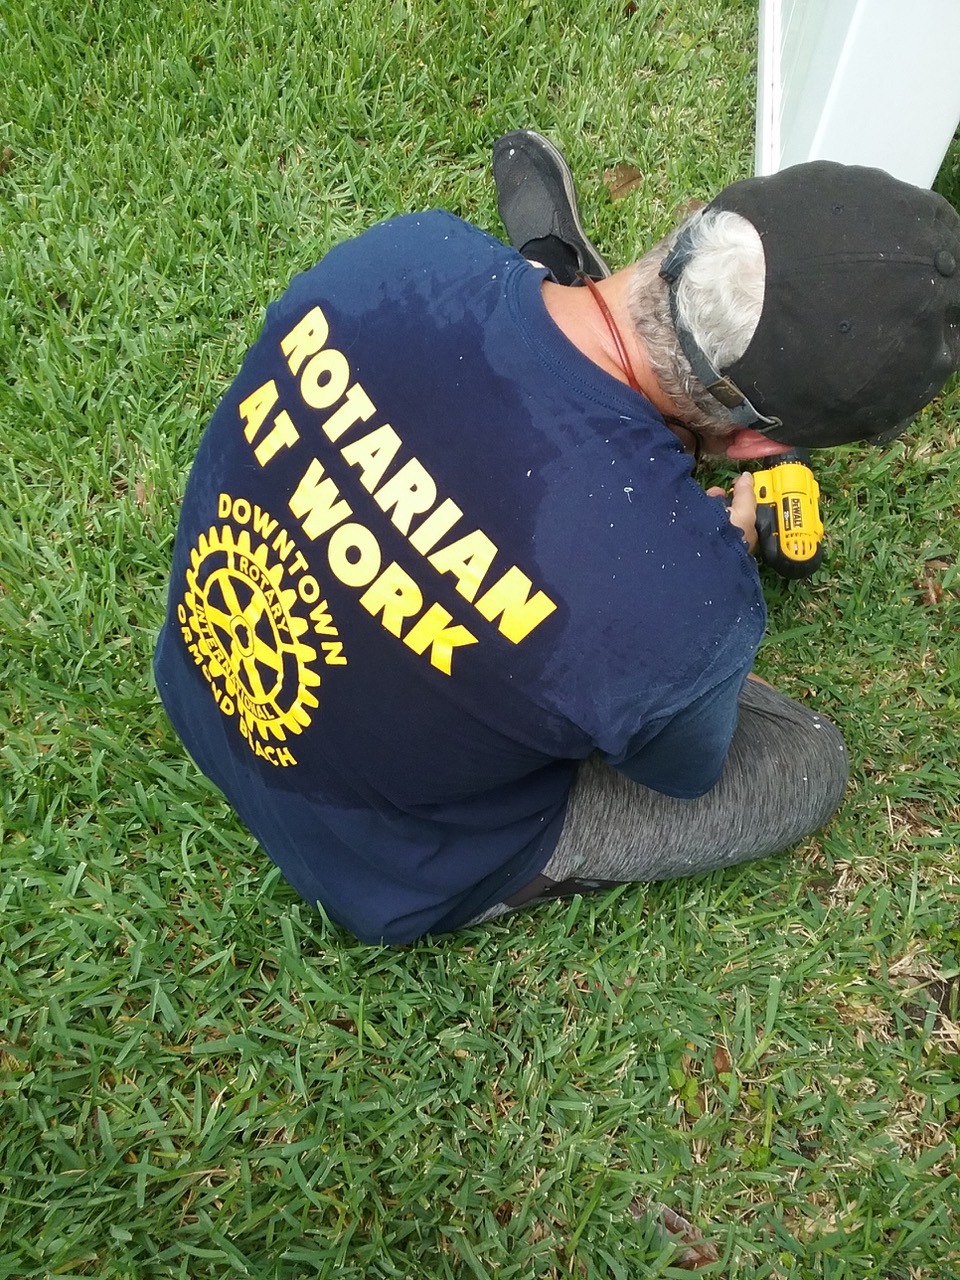 A Rotary Club member works on a local 92-year-old widow's fence in Ormond Beach. Courtesy photo